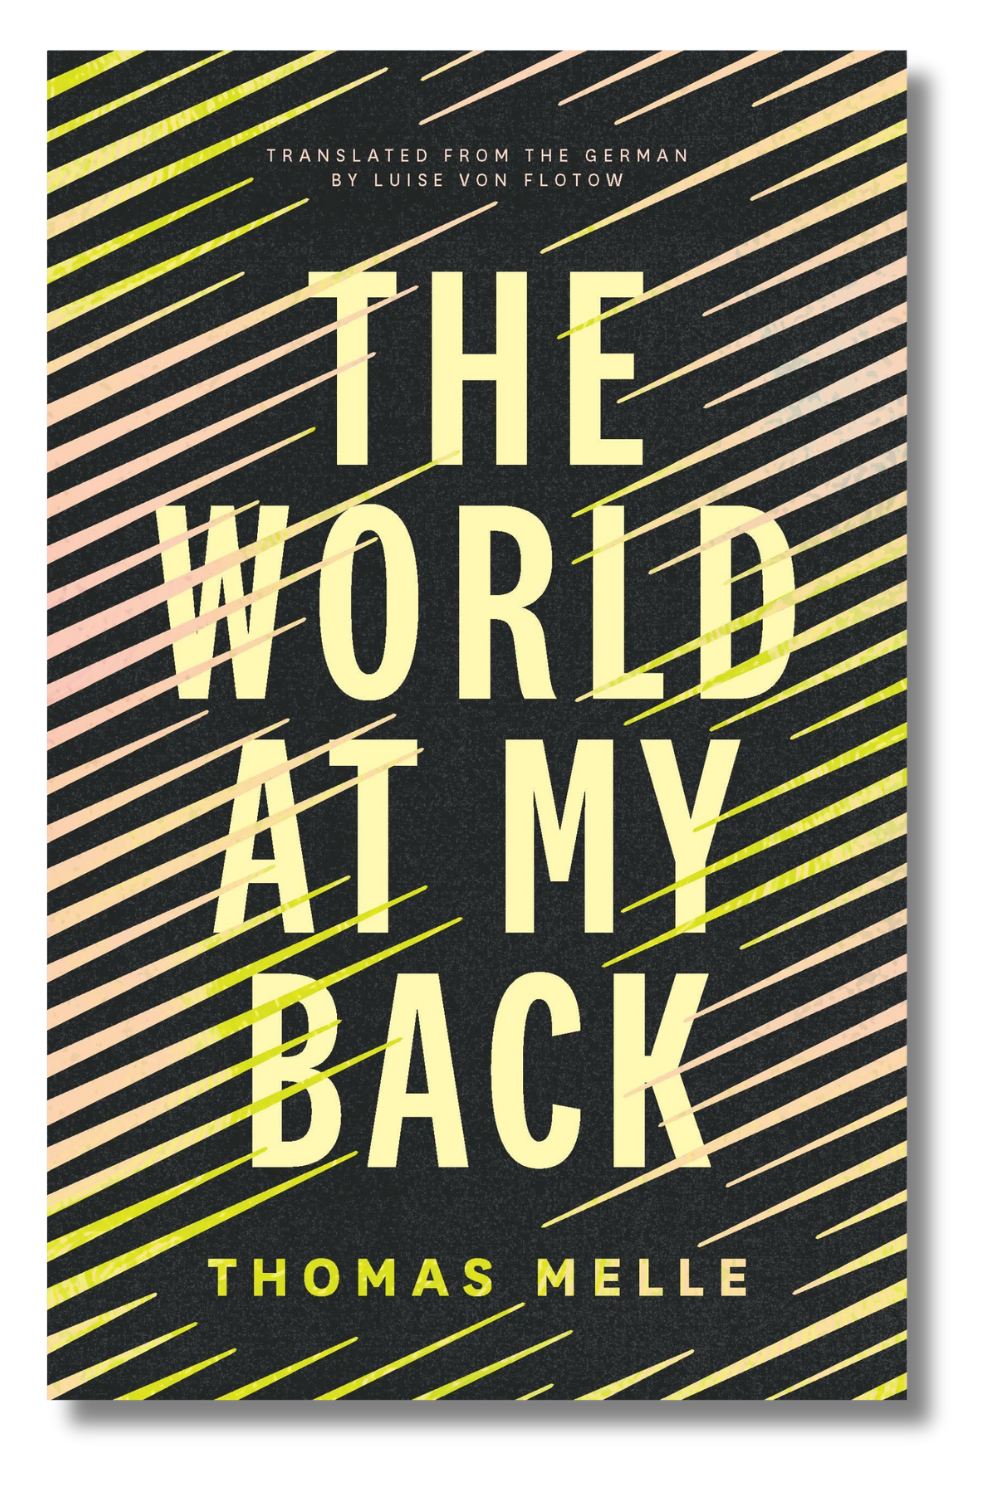 The cover of "The World at My Back" by Thomas Melle, translated by Luise von Flotow